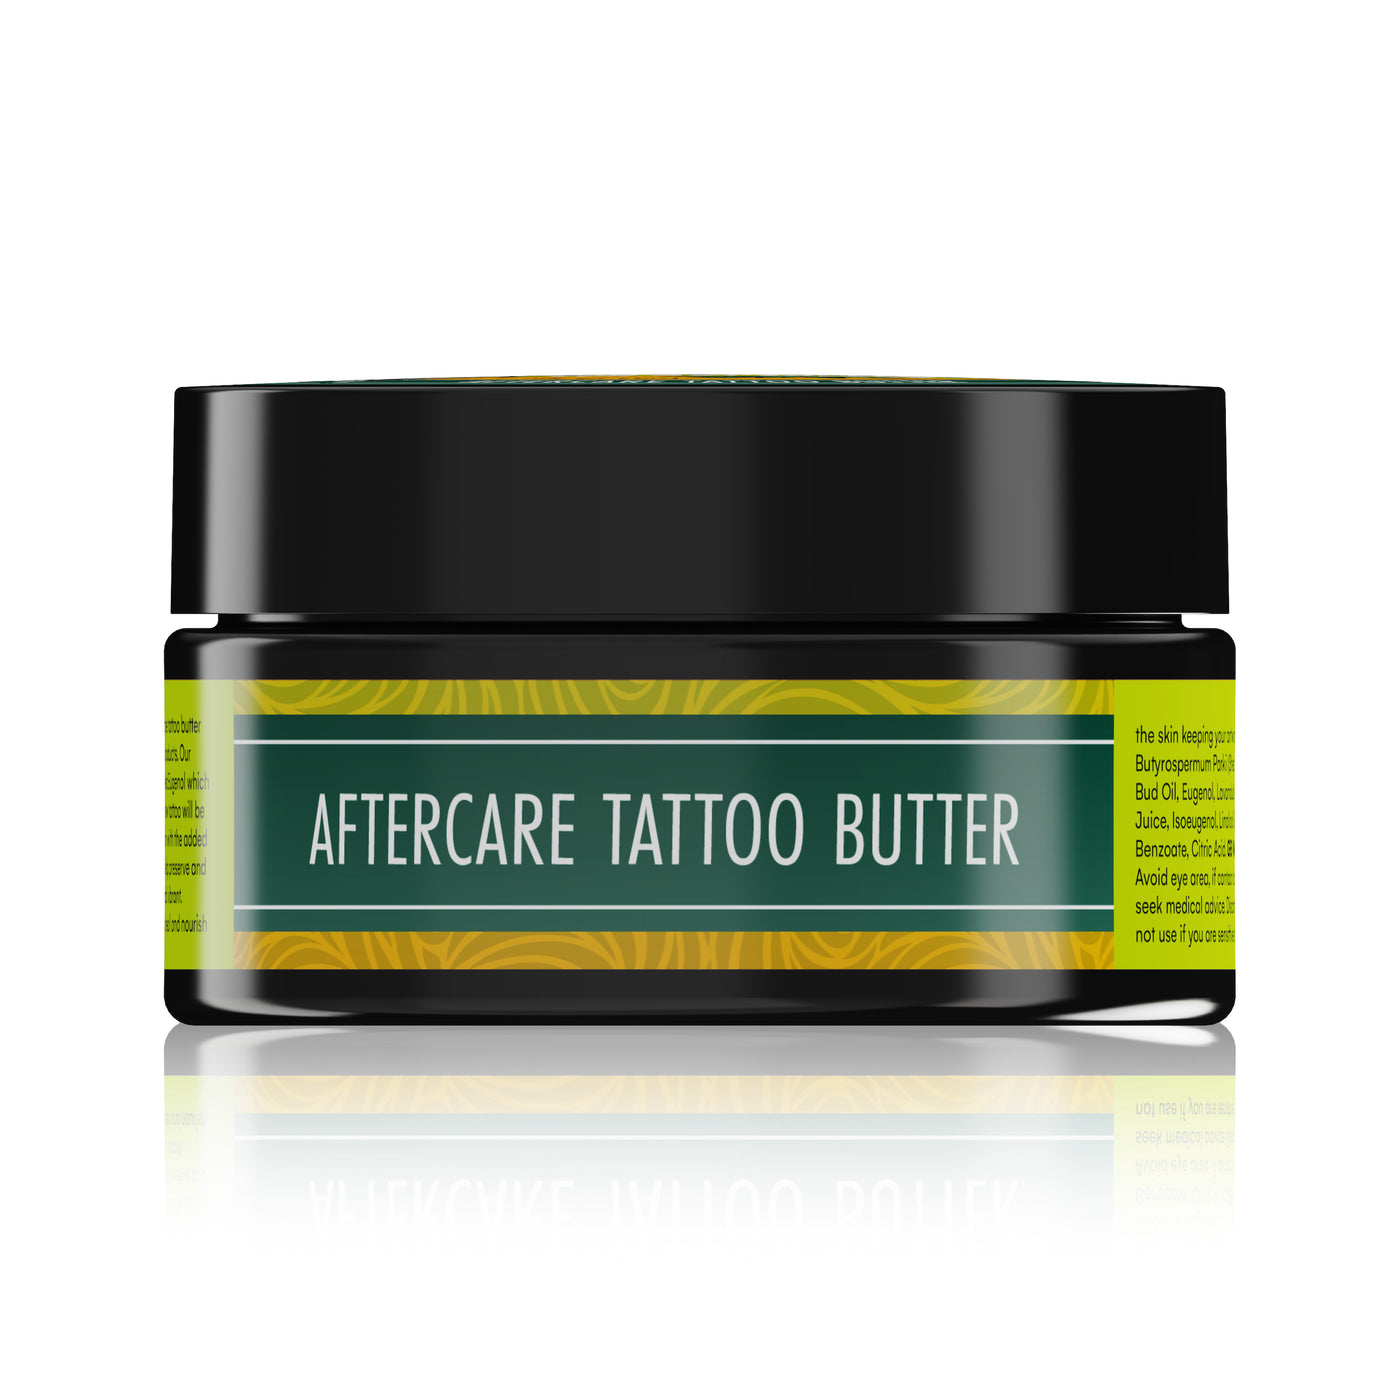 Aftercare Tattoo Butter